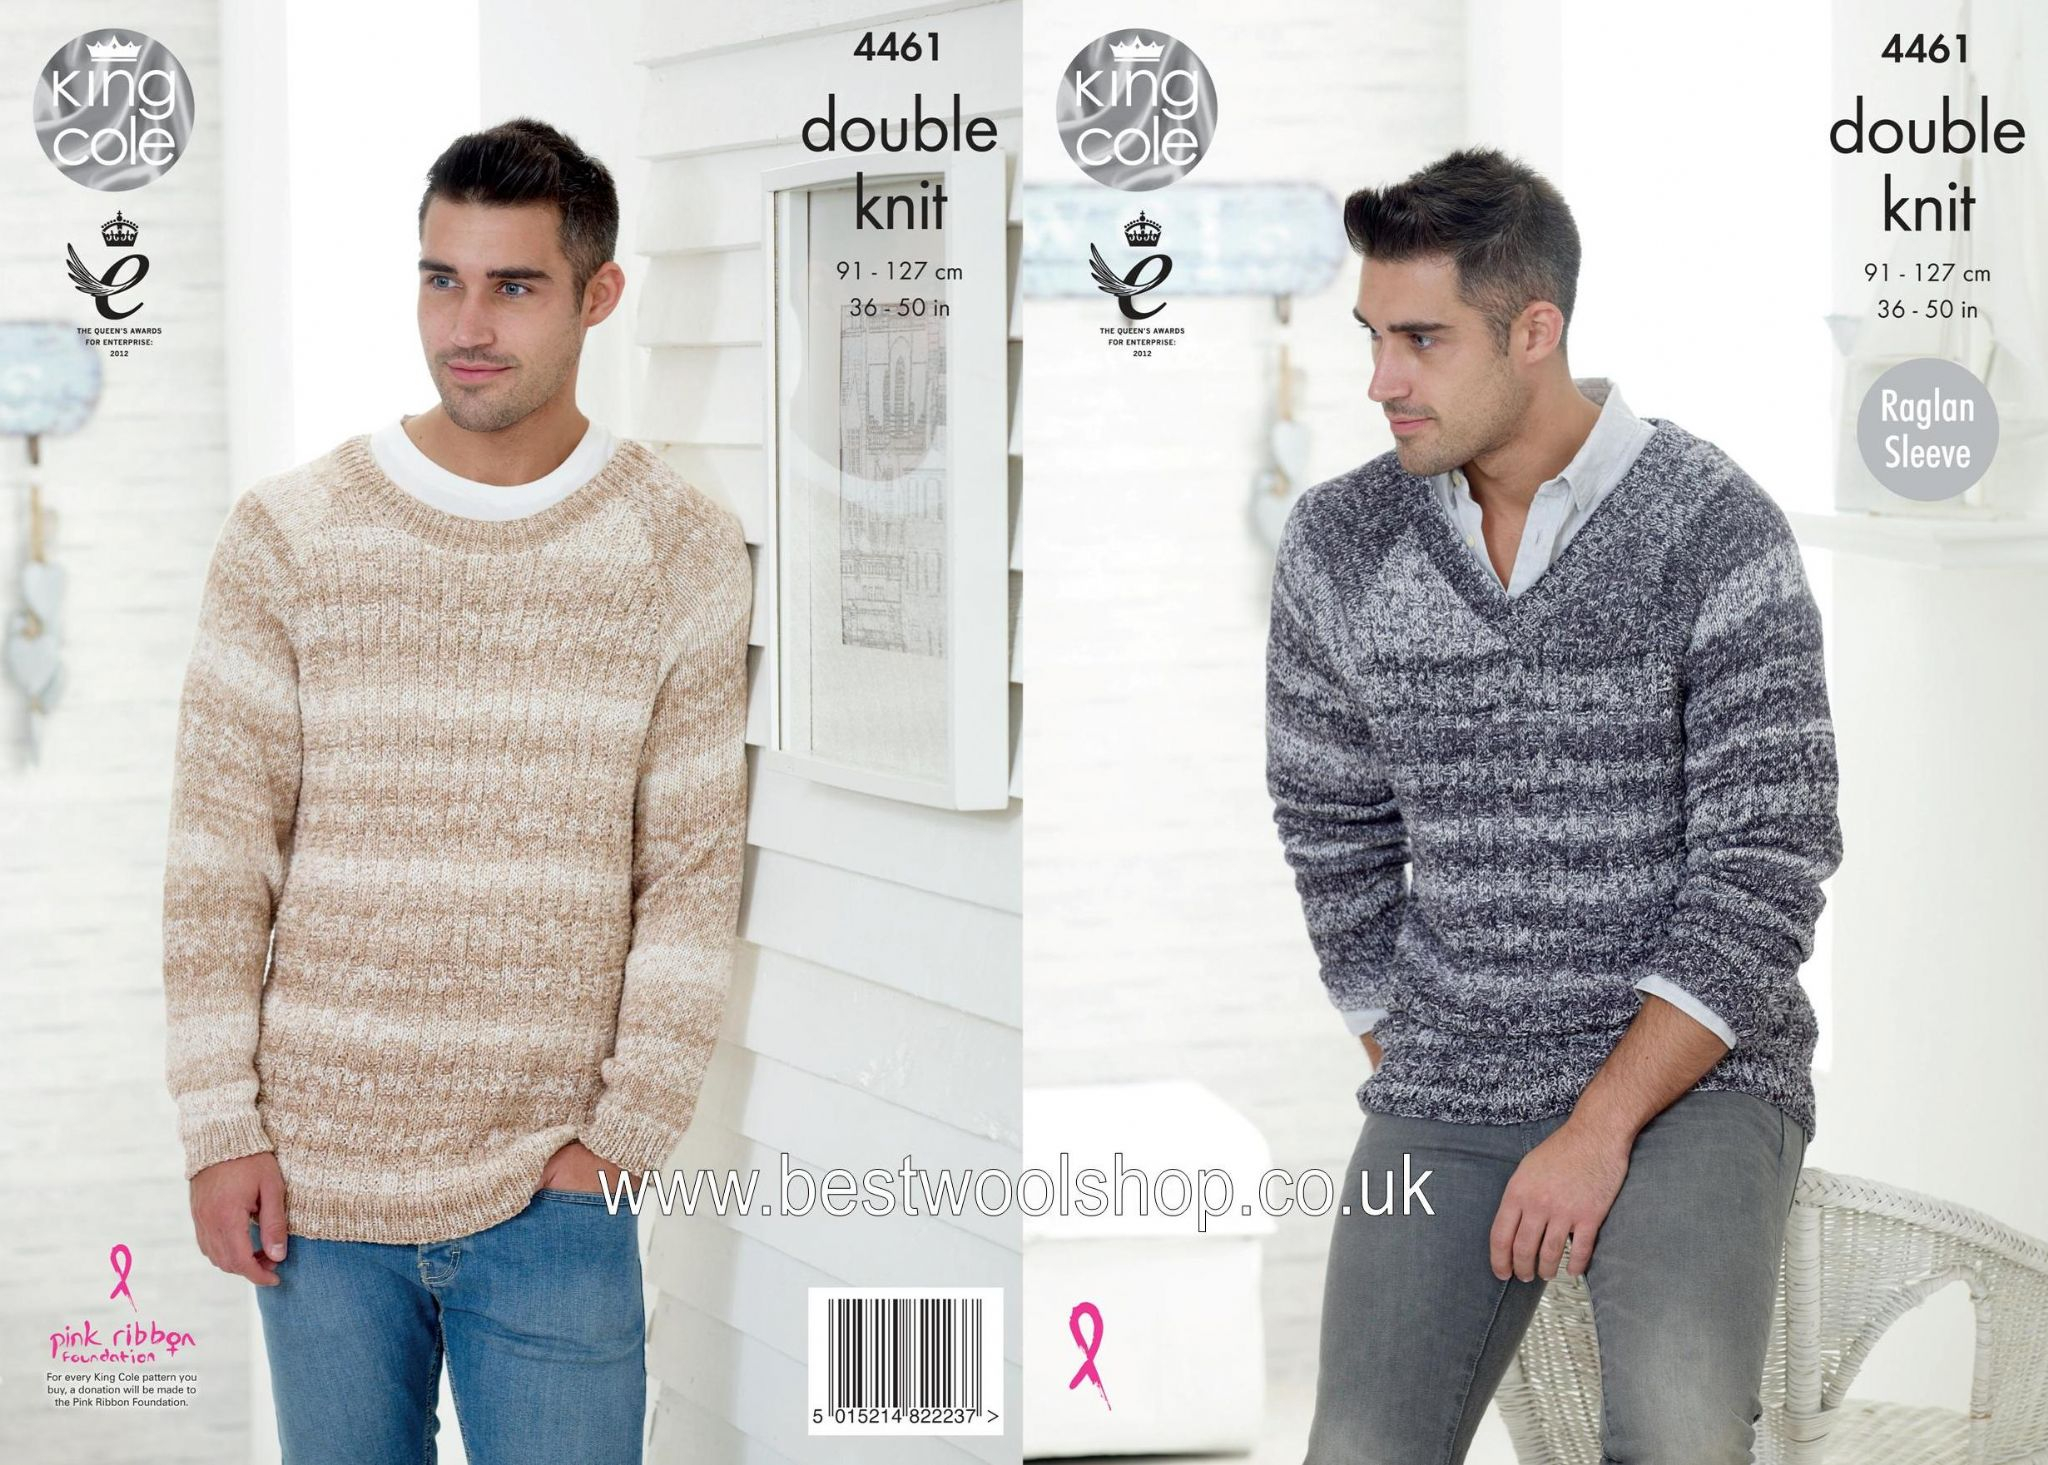 Knitting Patterns Vogue 4461 King Cole Vogue Dk Mens Sweater Knitting Pattern To Fit Chest 36 To 50